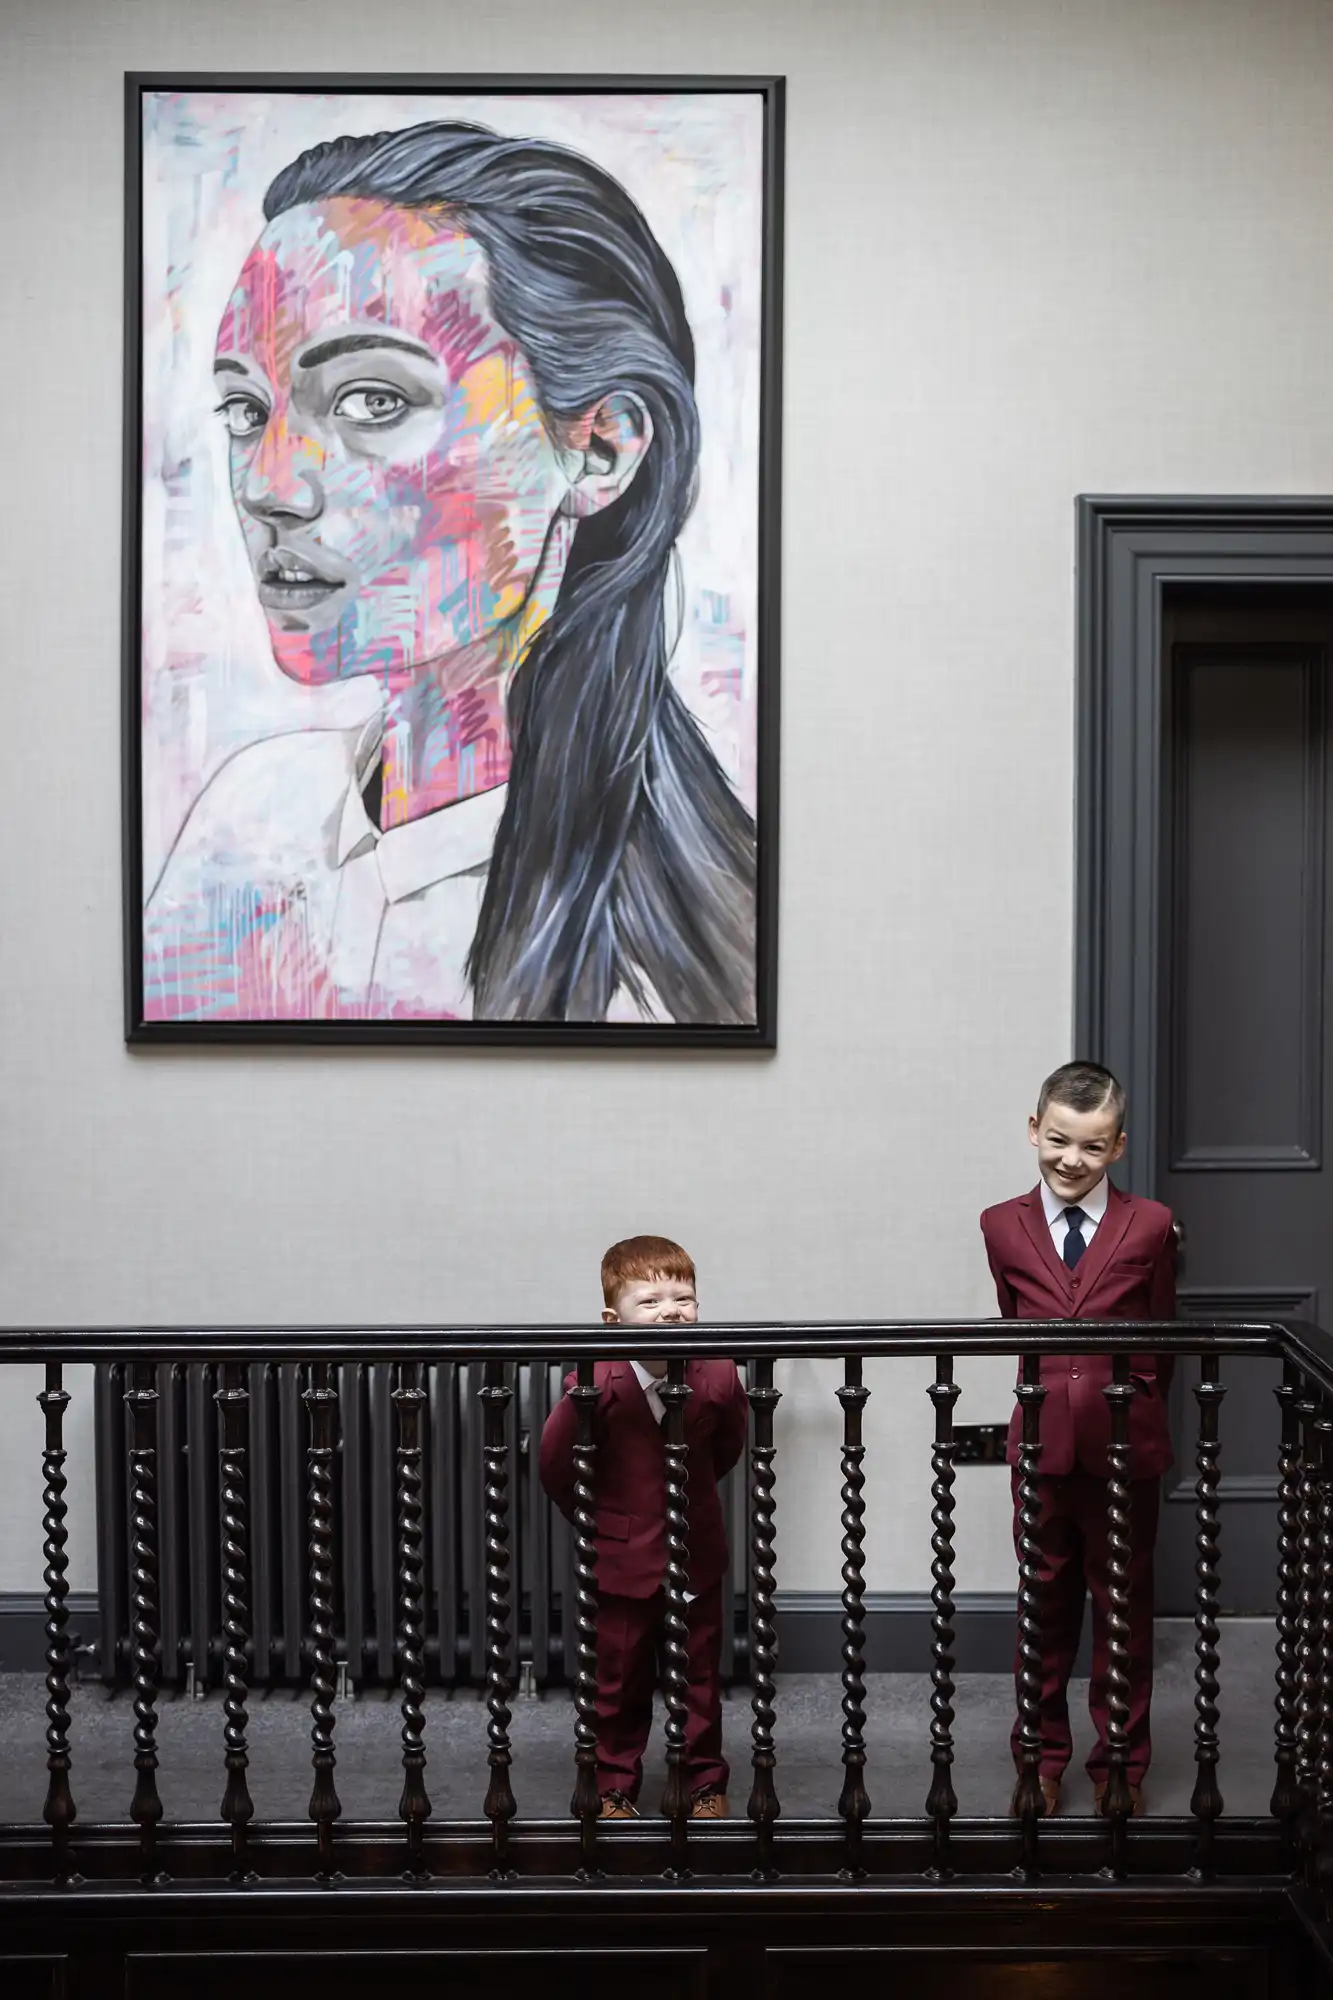 Portrait of a woman with vibrant pink and blue streaks on canvas, displayed above a staircase with two young boys in burgundy suits observing it.